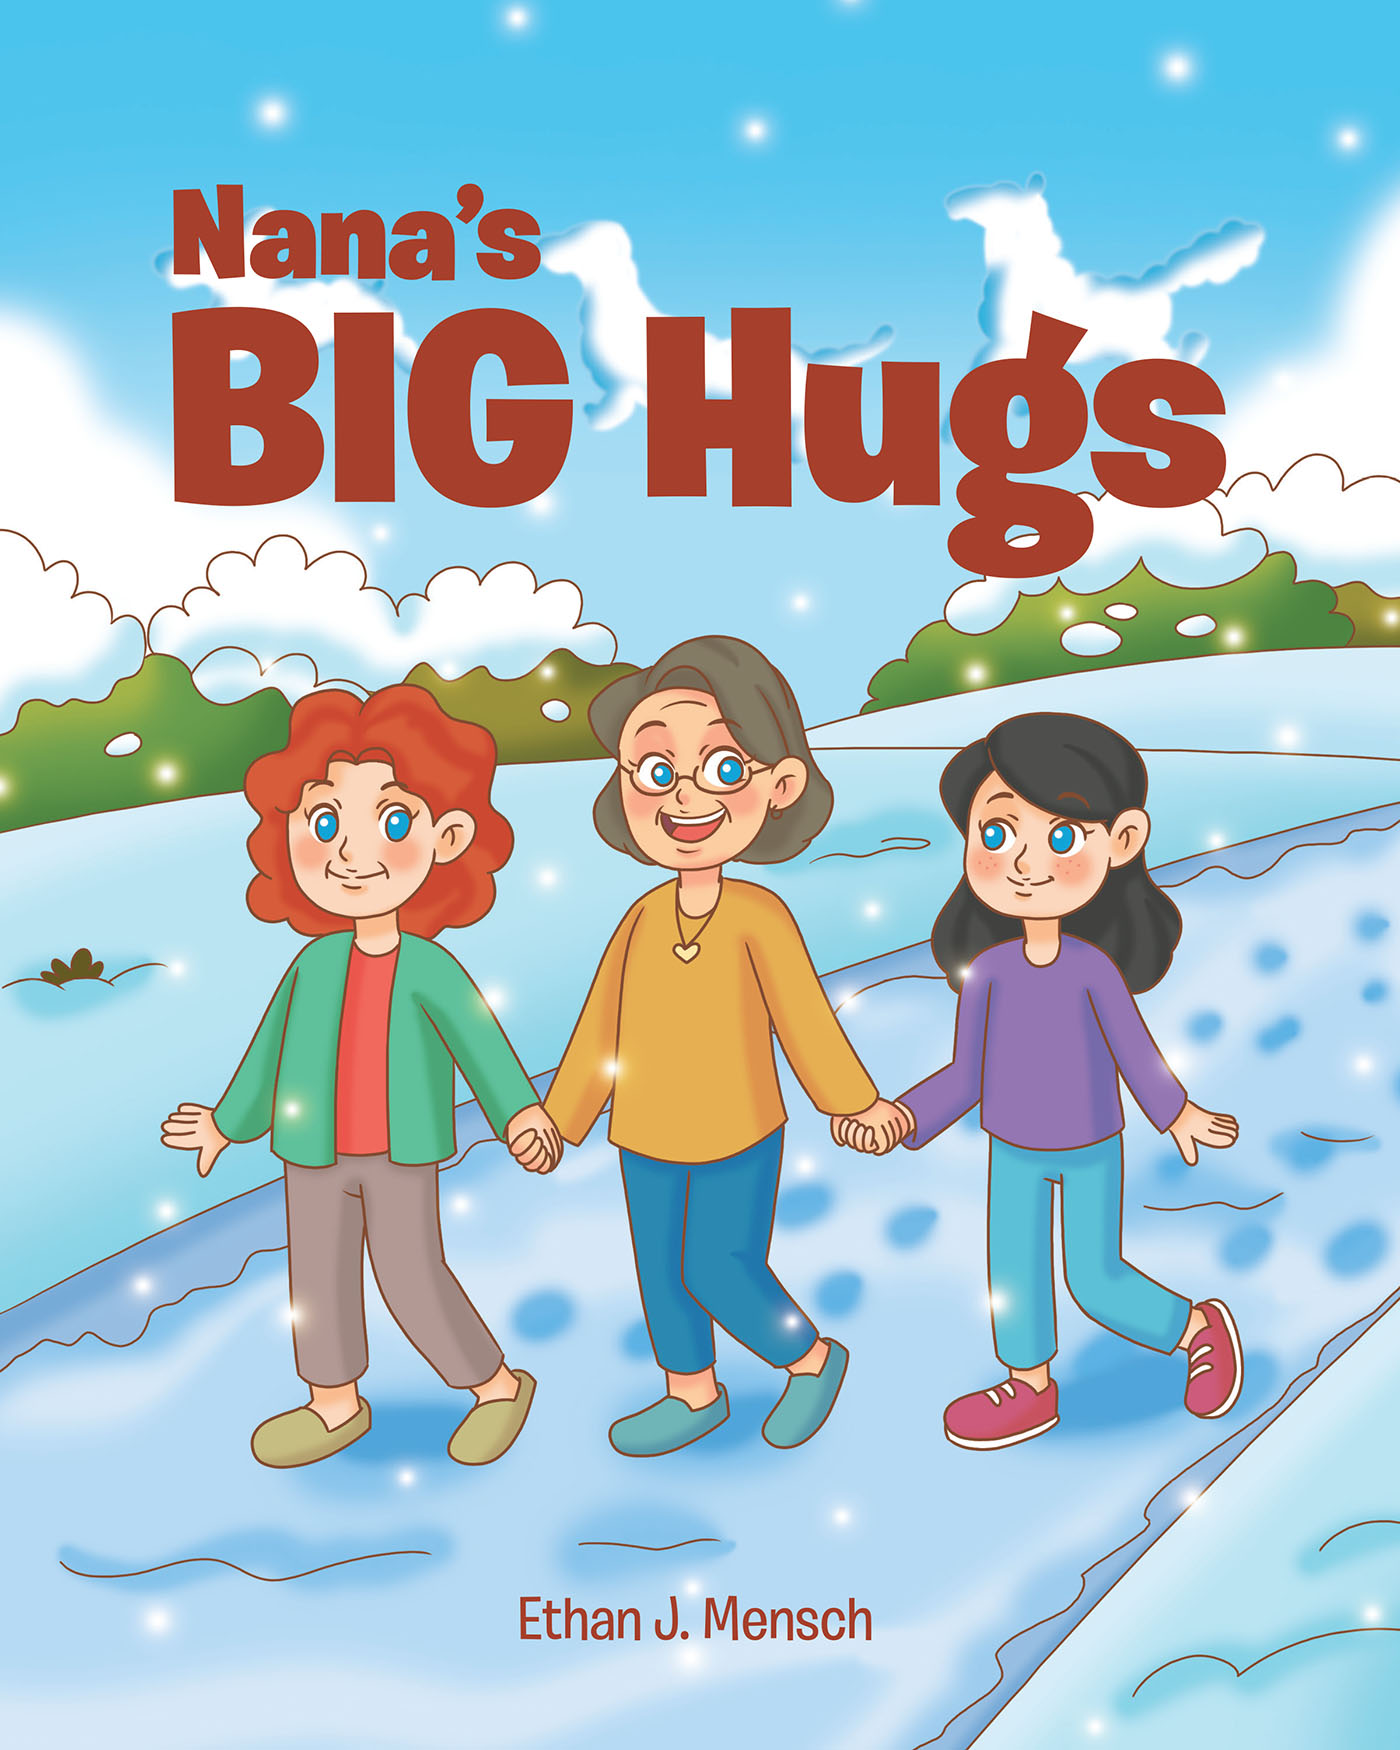 Ethan J. Mensch’s Newly Released "Nana’s BIG Hugs" is a Heartfelt Celebration of a Grandmother’s Love and Faith in the Lord